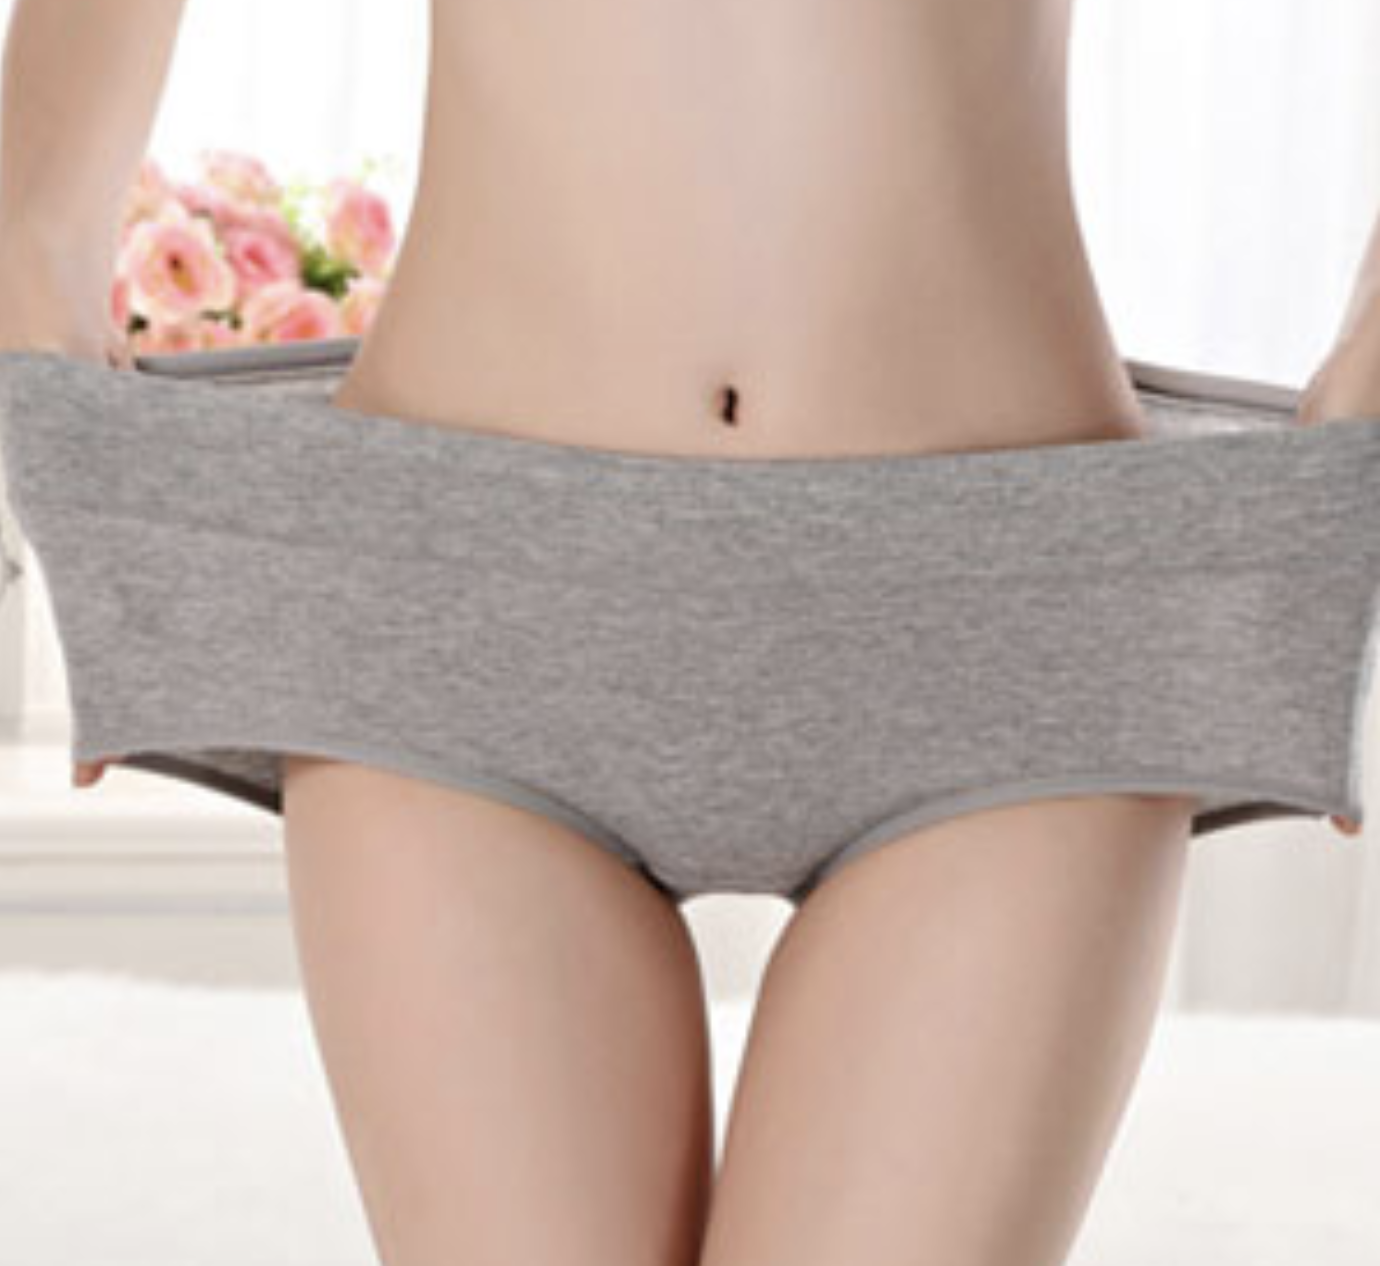 Model showing stretchiness of underwear